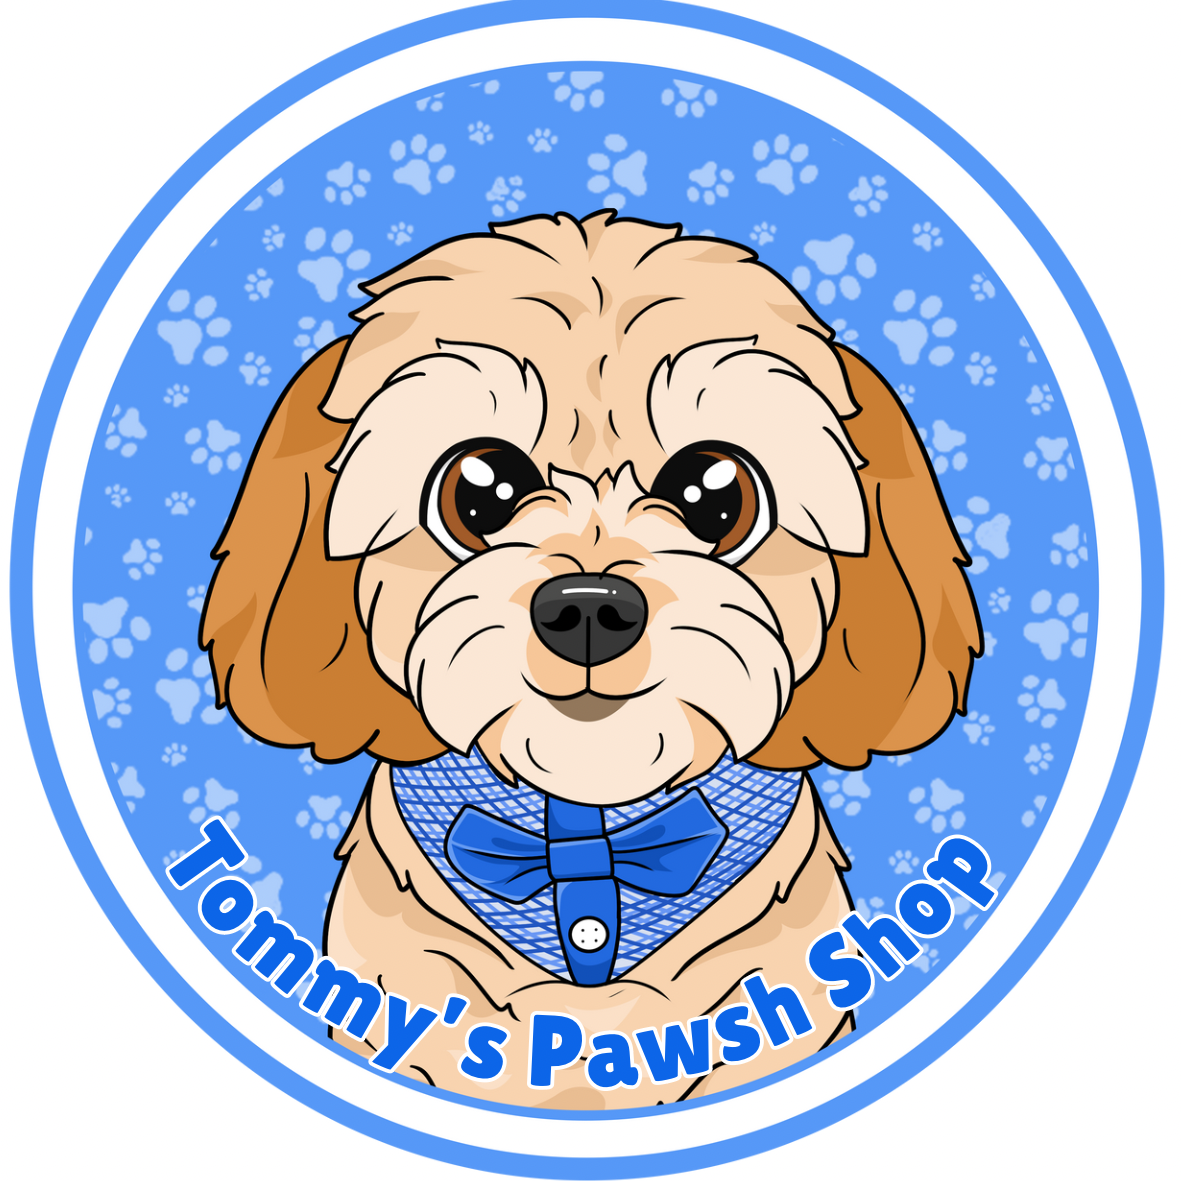 Tommy’s Pawsh Shop